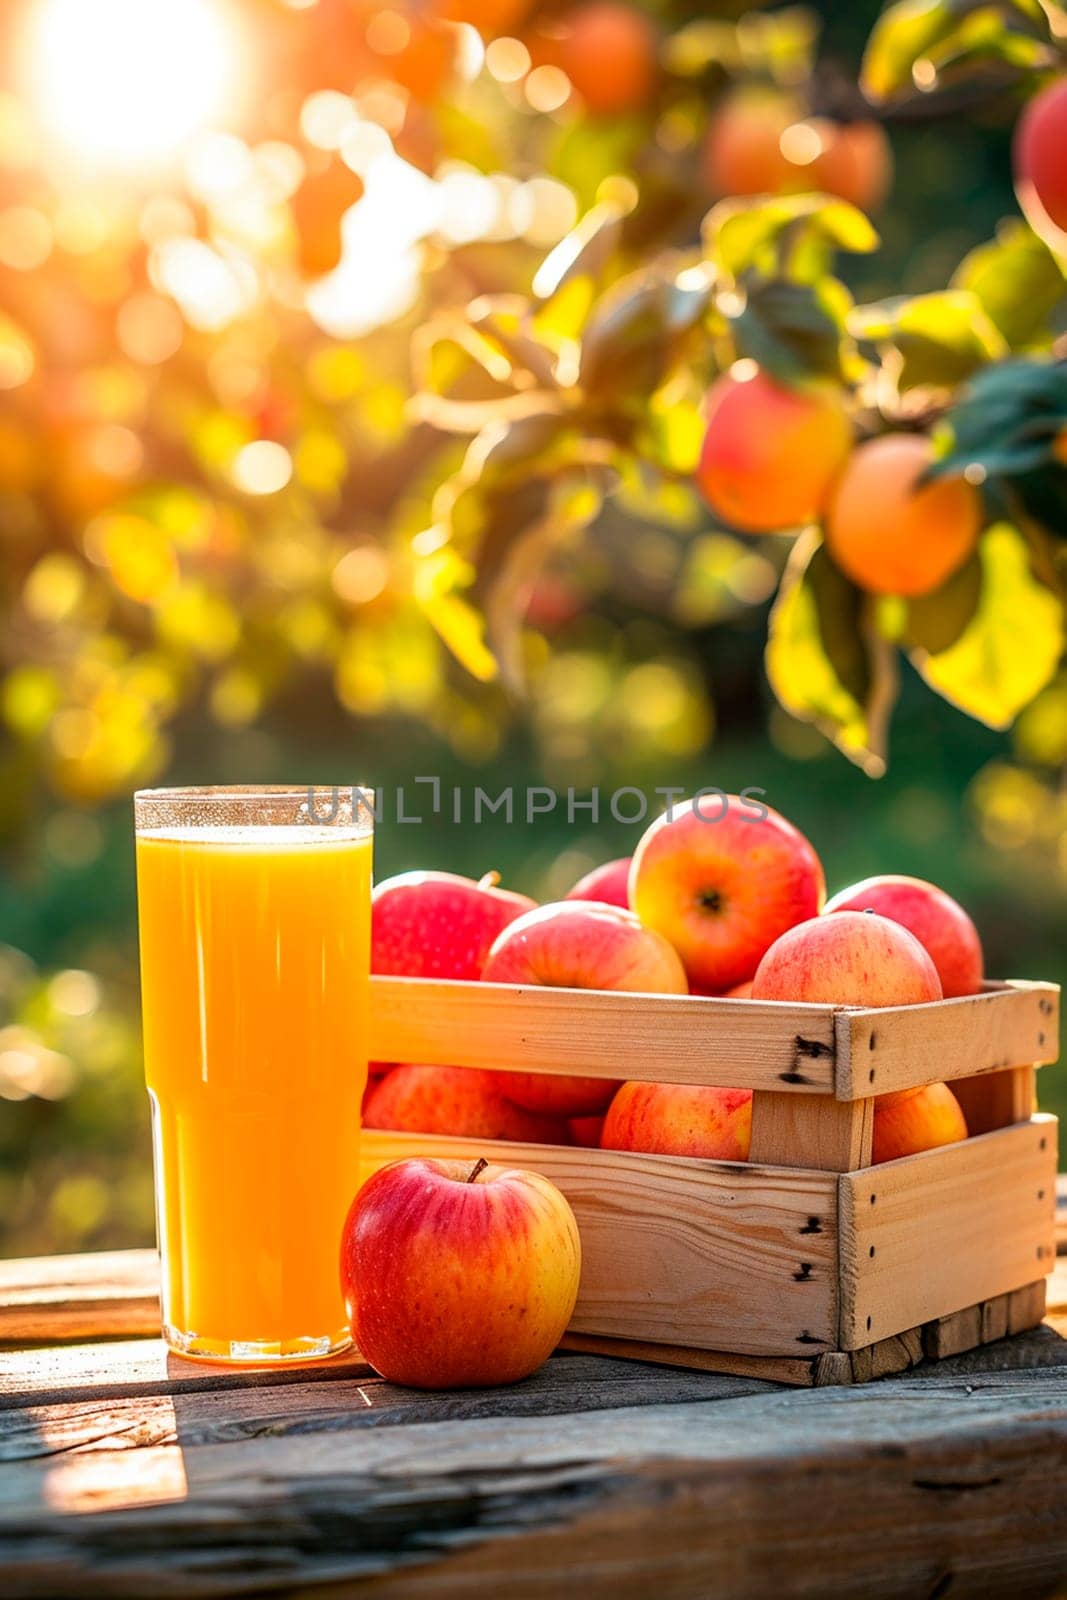 Apple juice on a table in the garden. Selective focus. Food.